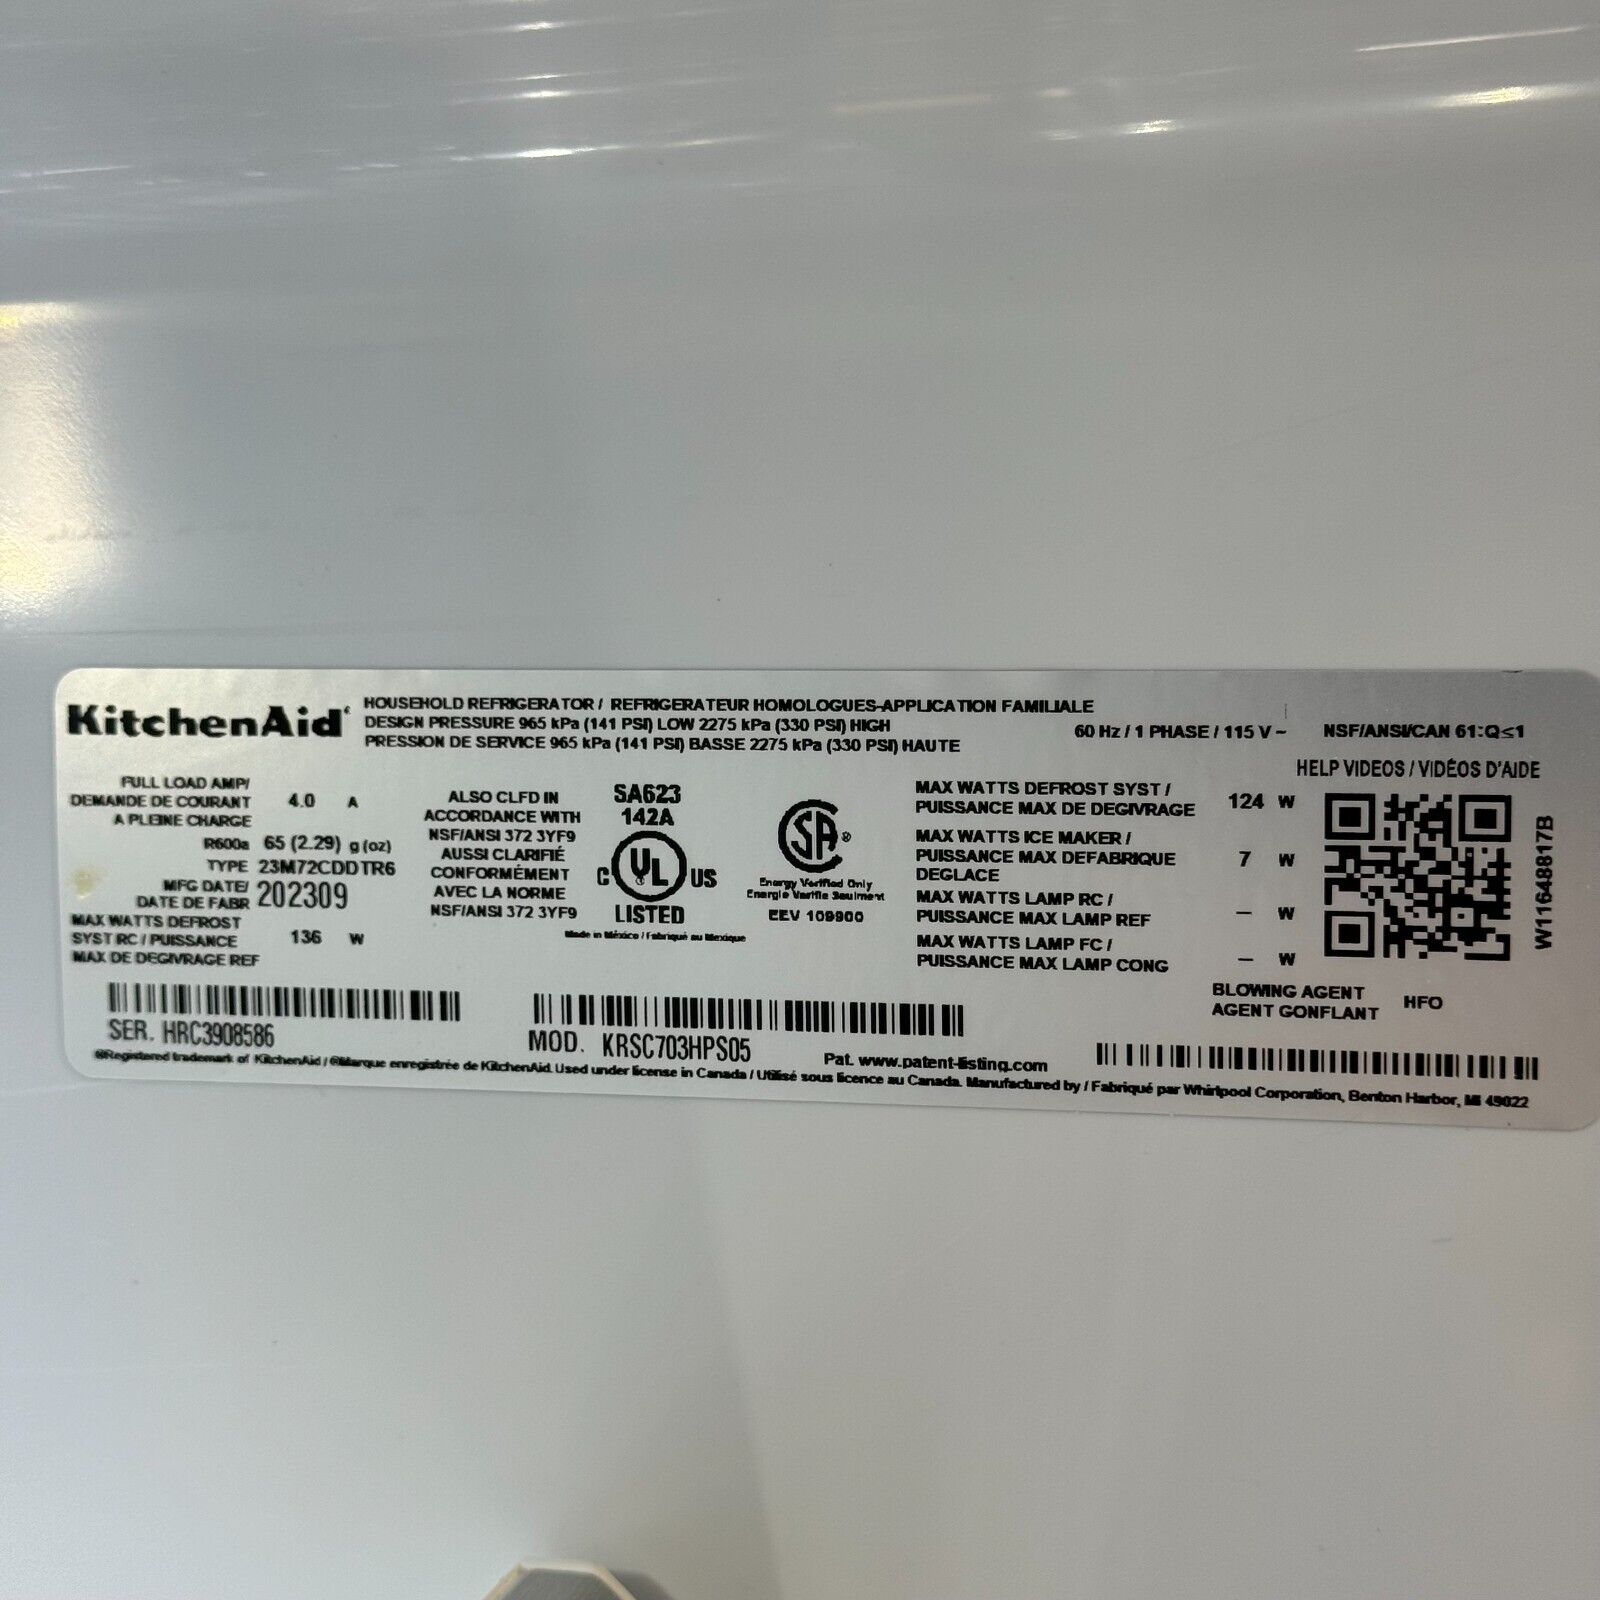 KitchenAid KRSC703HPS 36" Stainless Steel CounterDepth Side by Side Refrigerator